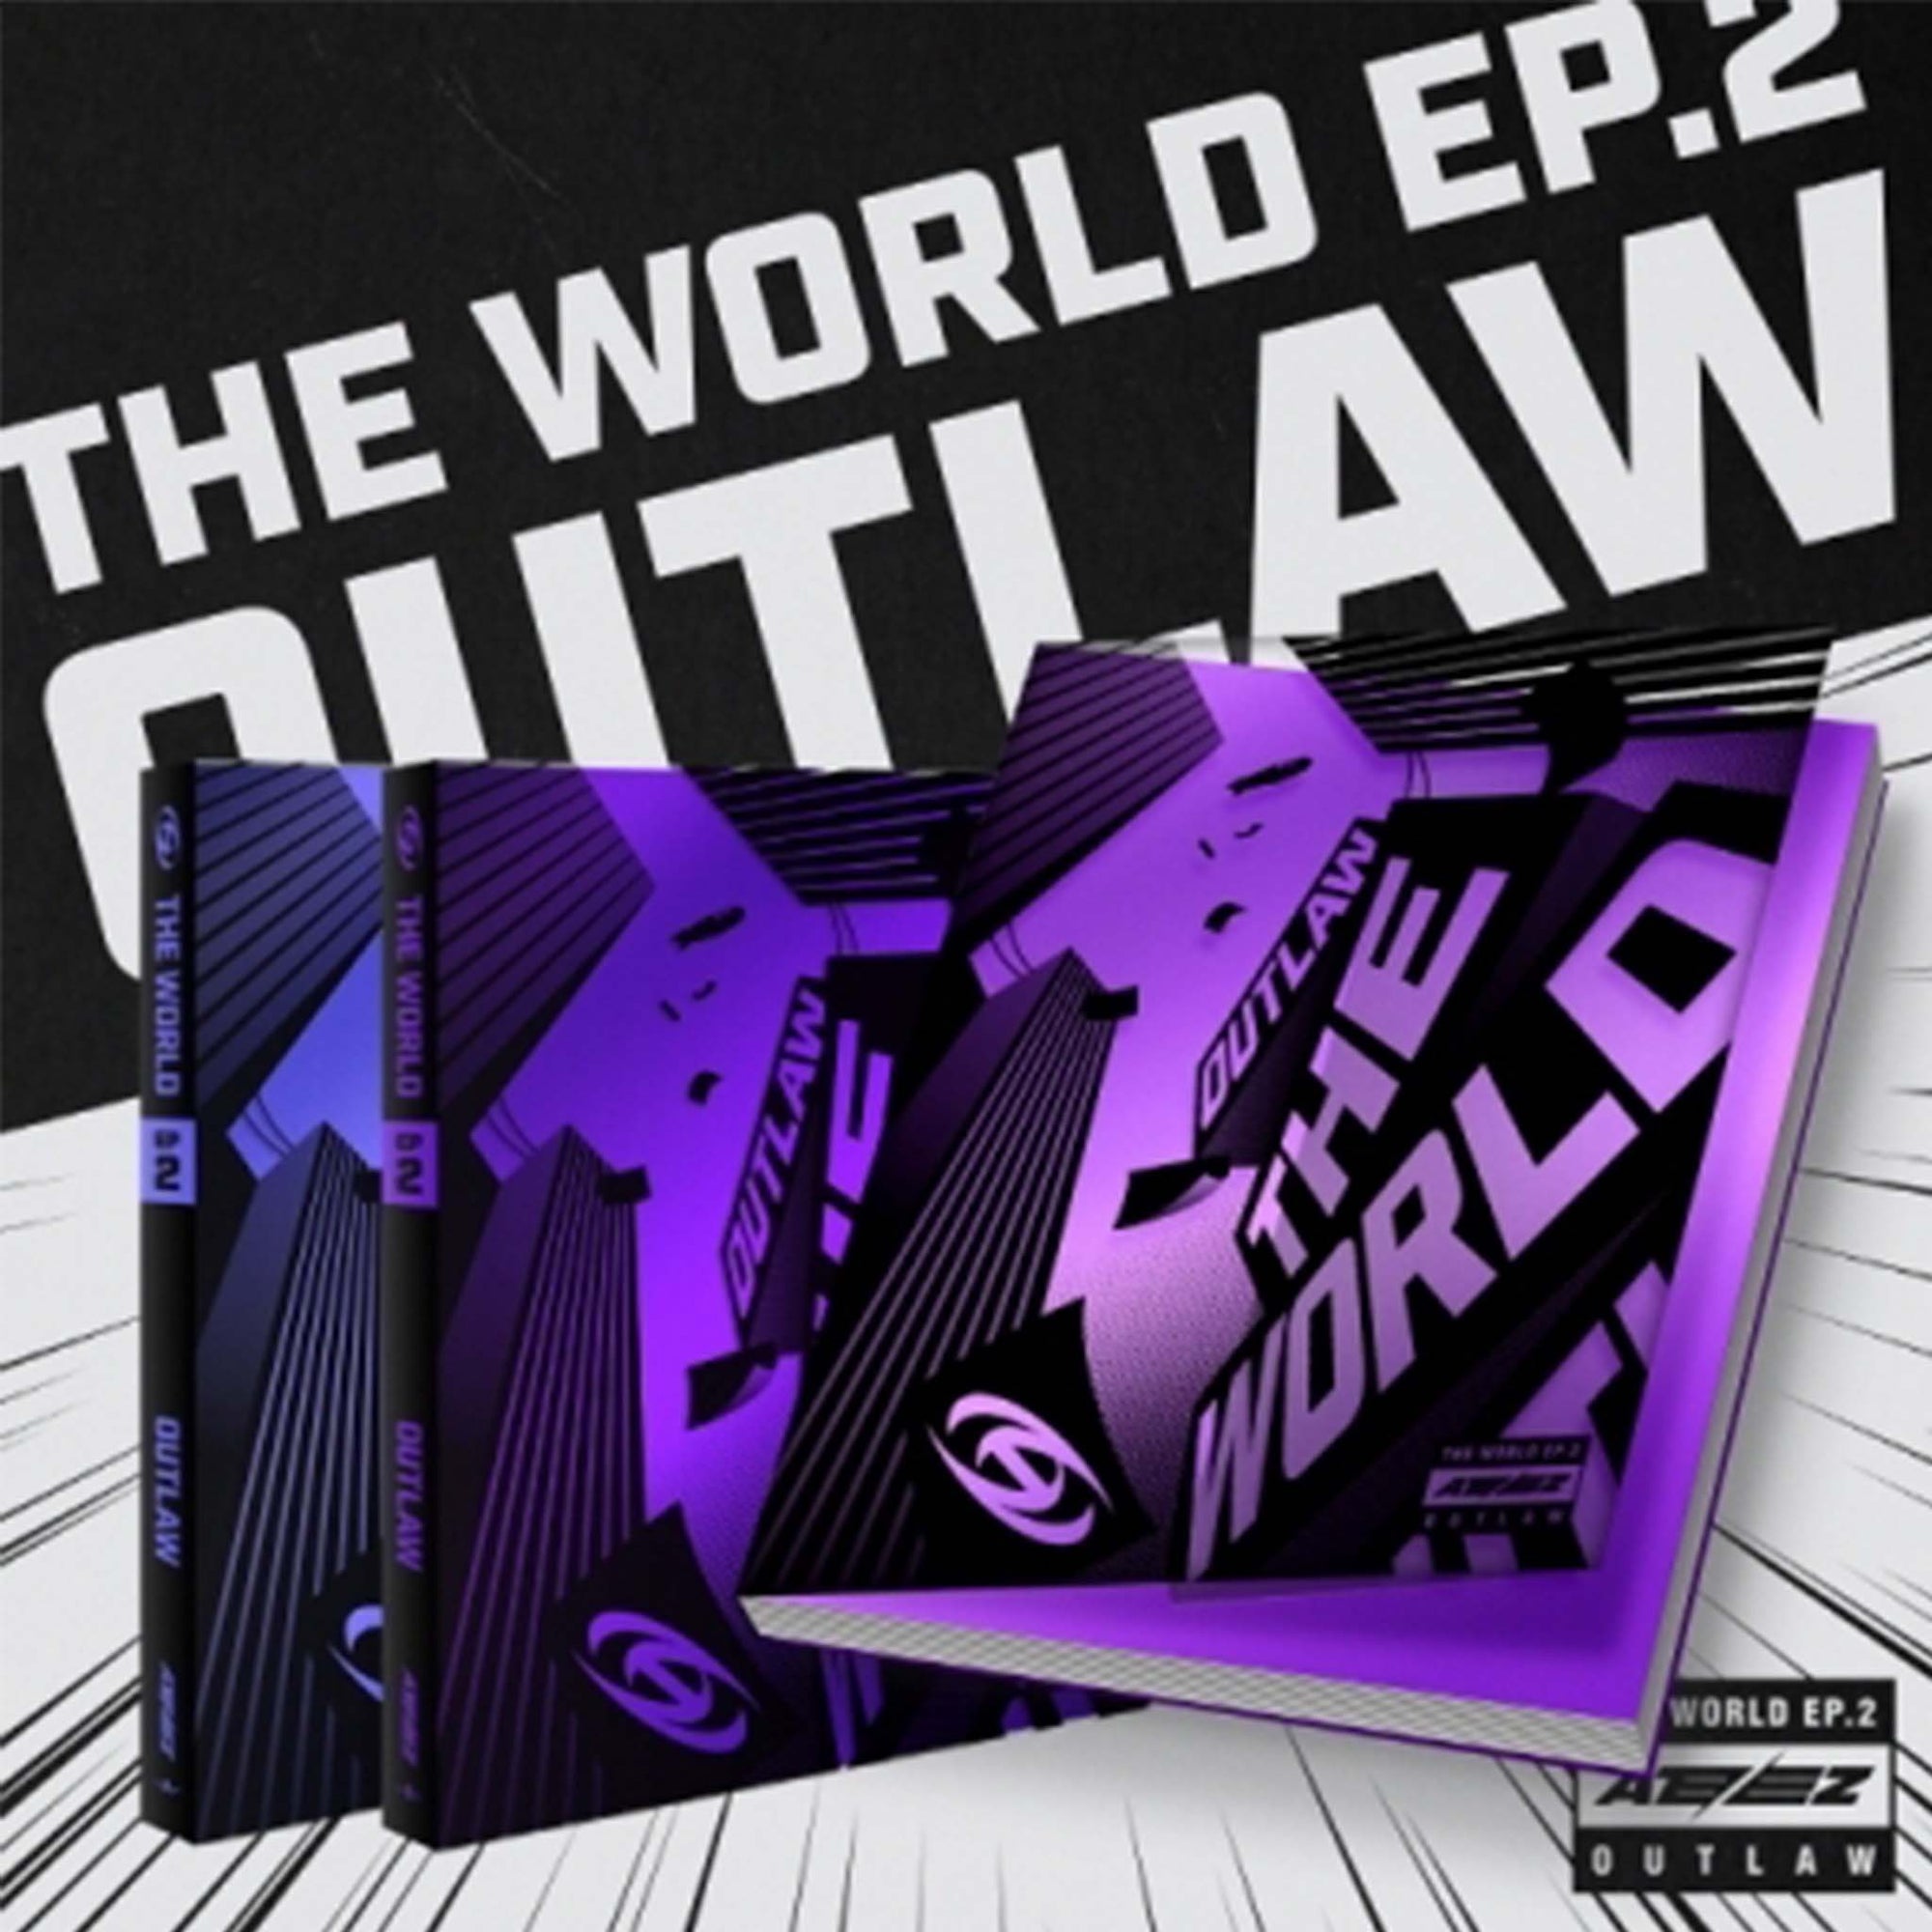 THE WORLD EP.2 : OUTLAW